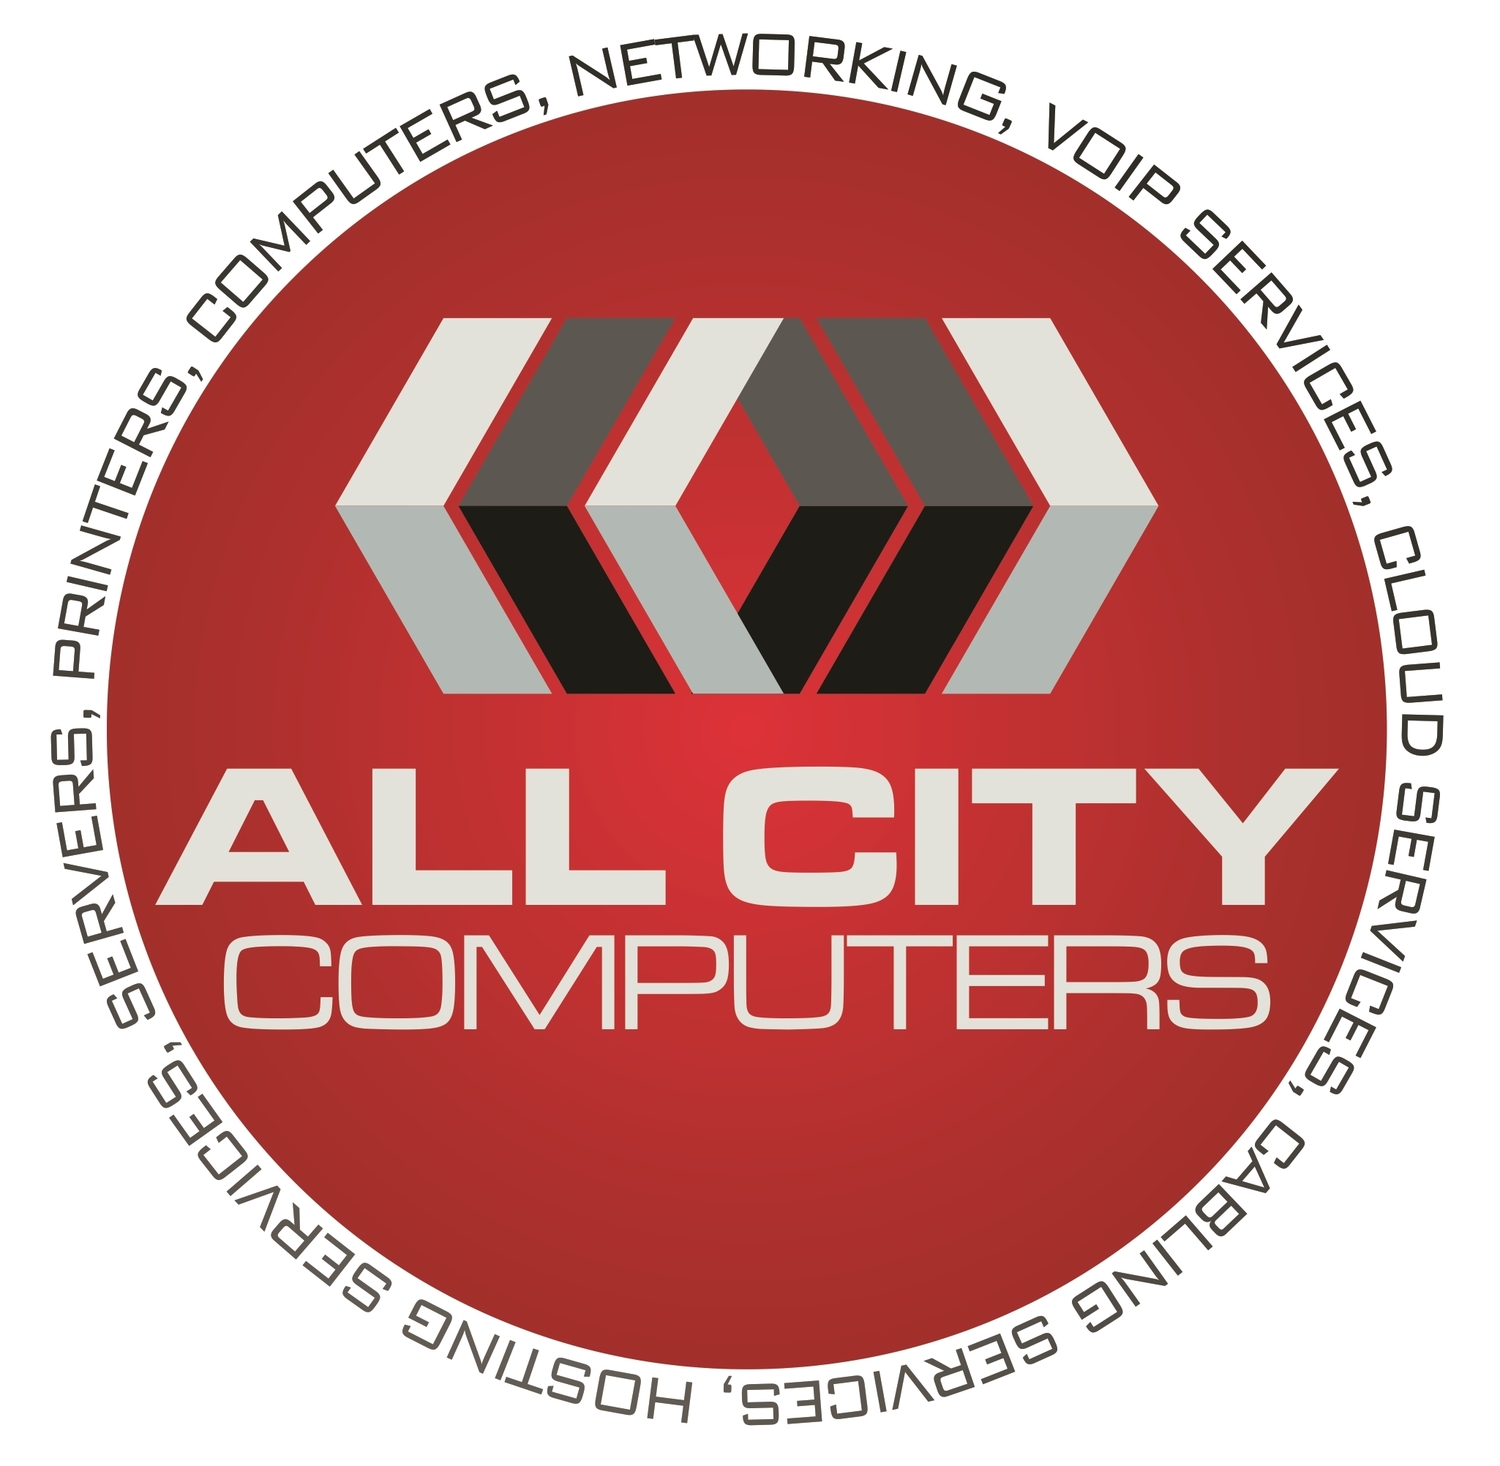 All City Computers - Los Angeles County Computer Networking Support Services for Small Business